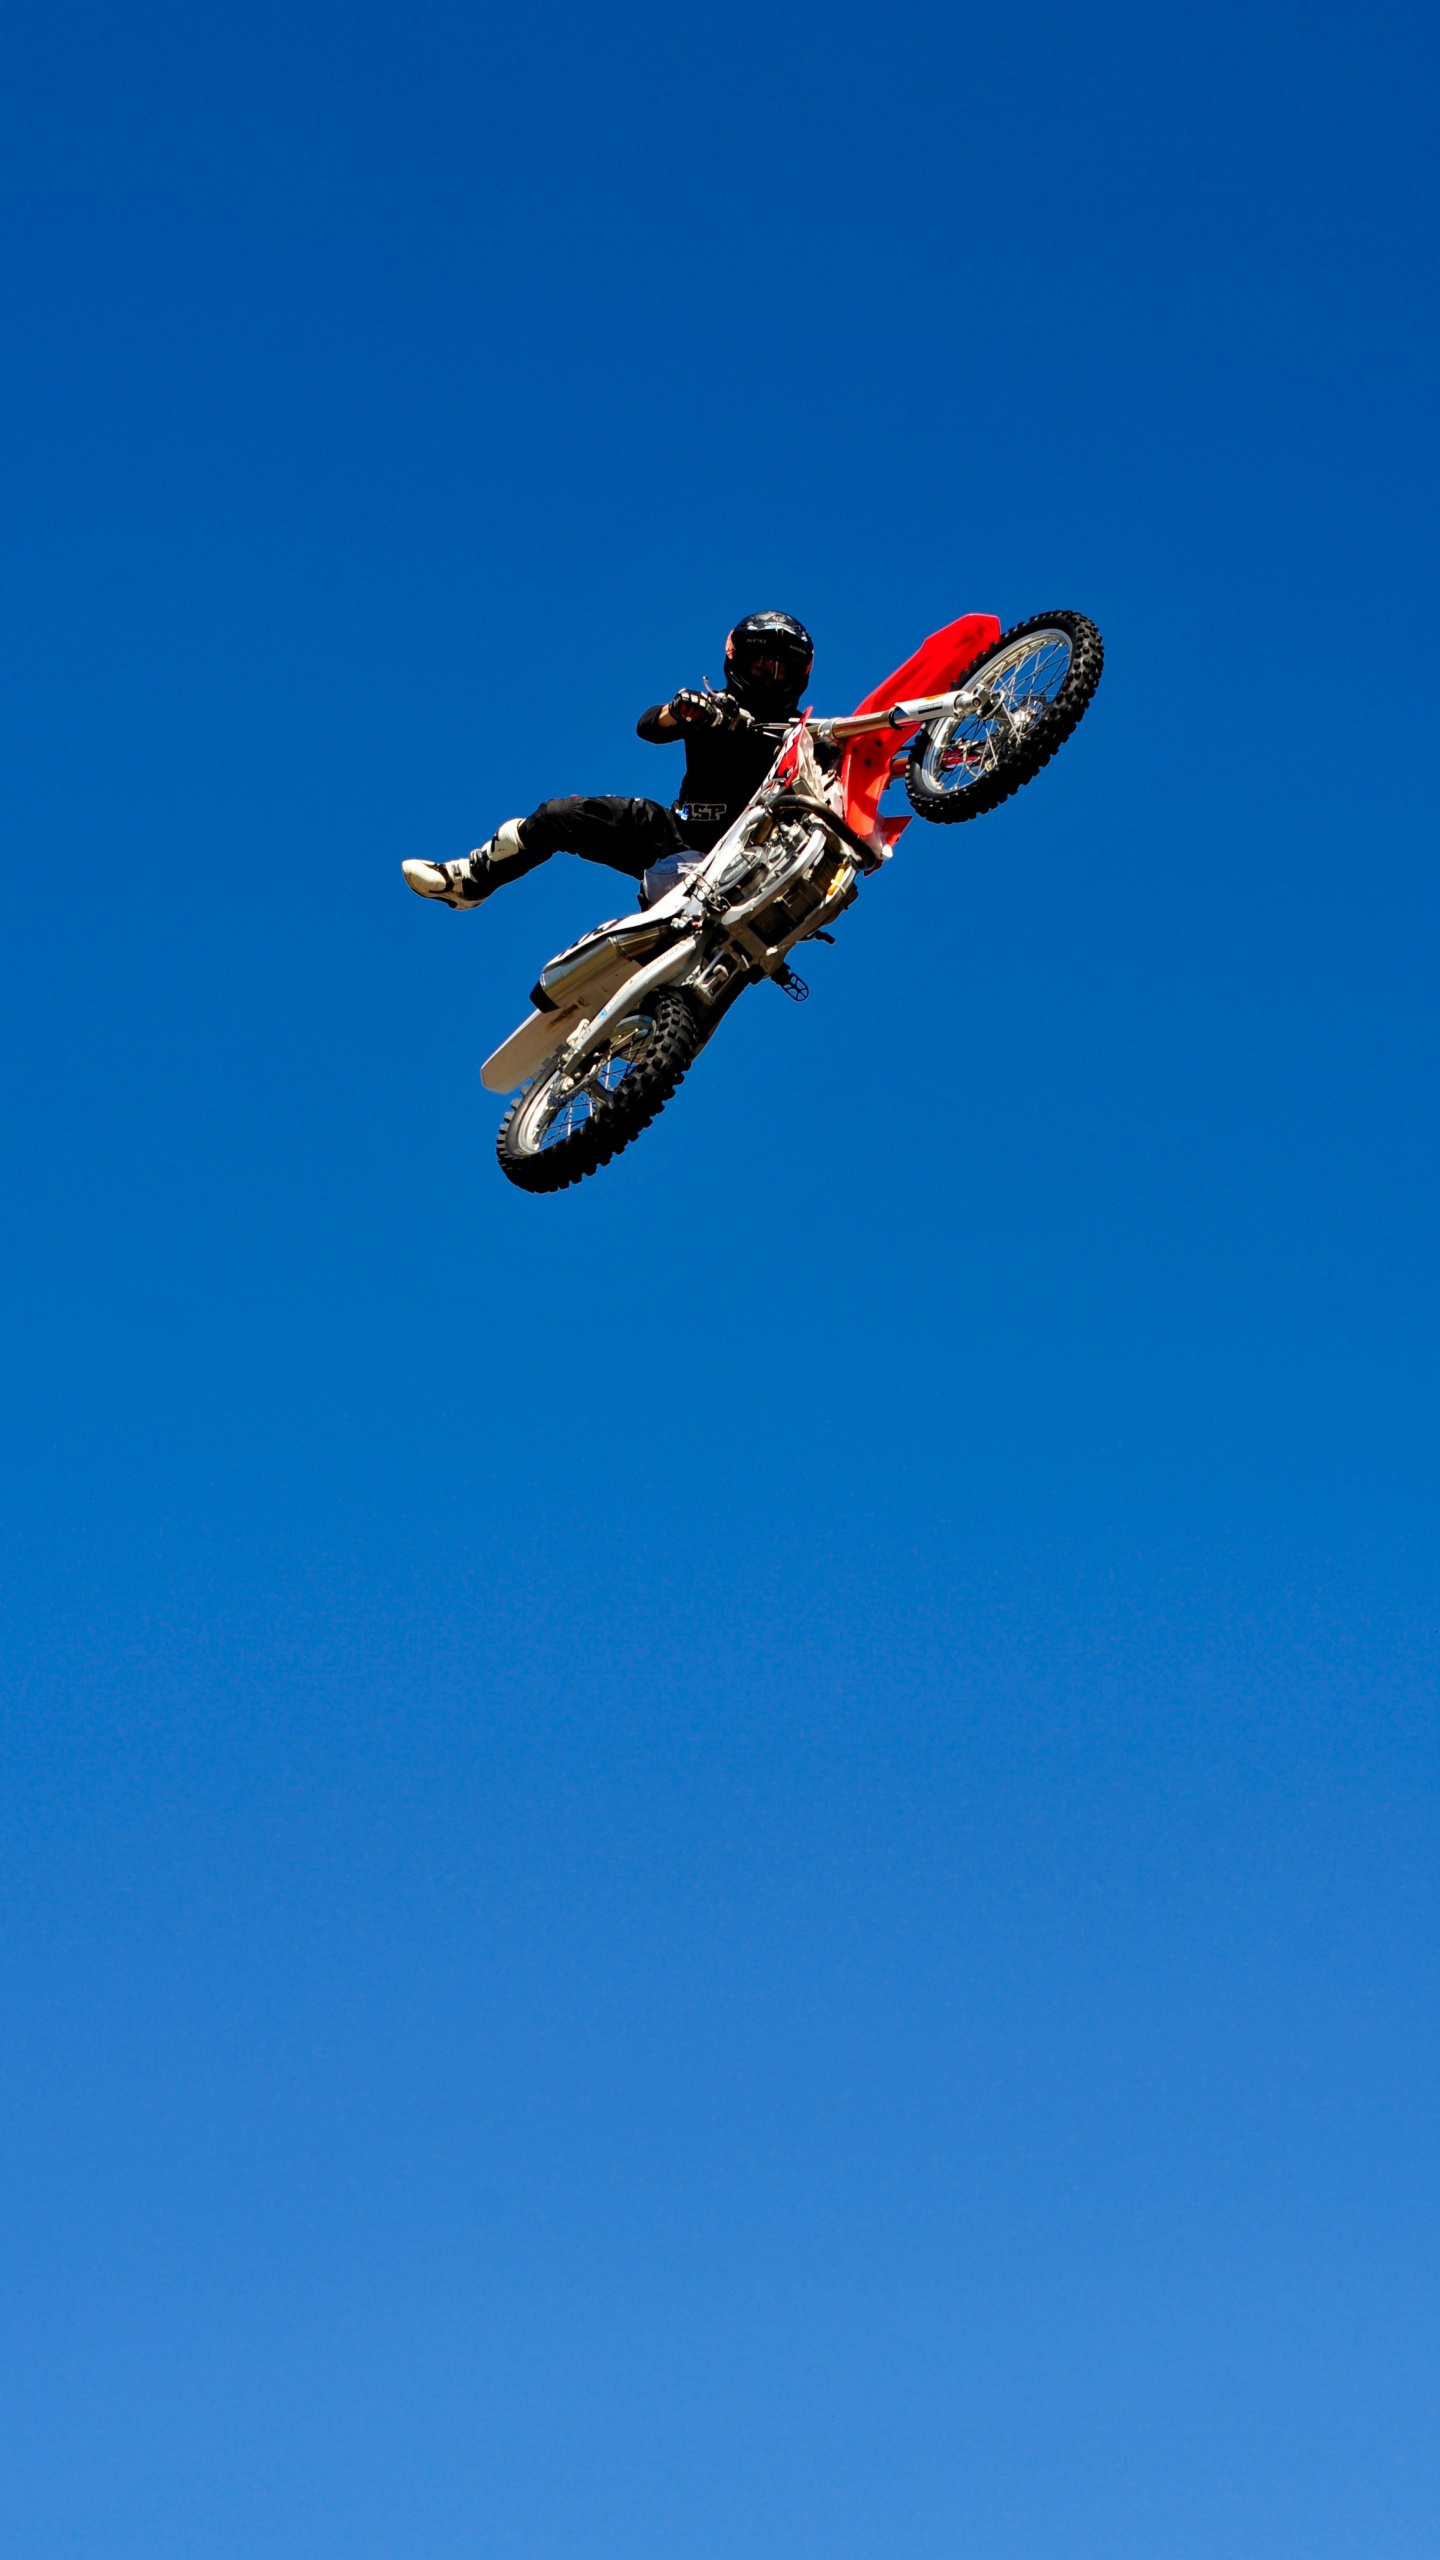 Man in Red and Black Motocross Suit Riding Red and White Motocross Dirt Bike. Wallpaper in 1440x2560 Resolution